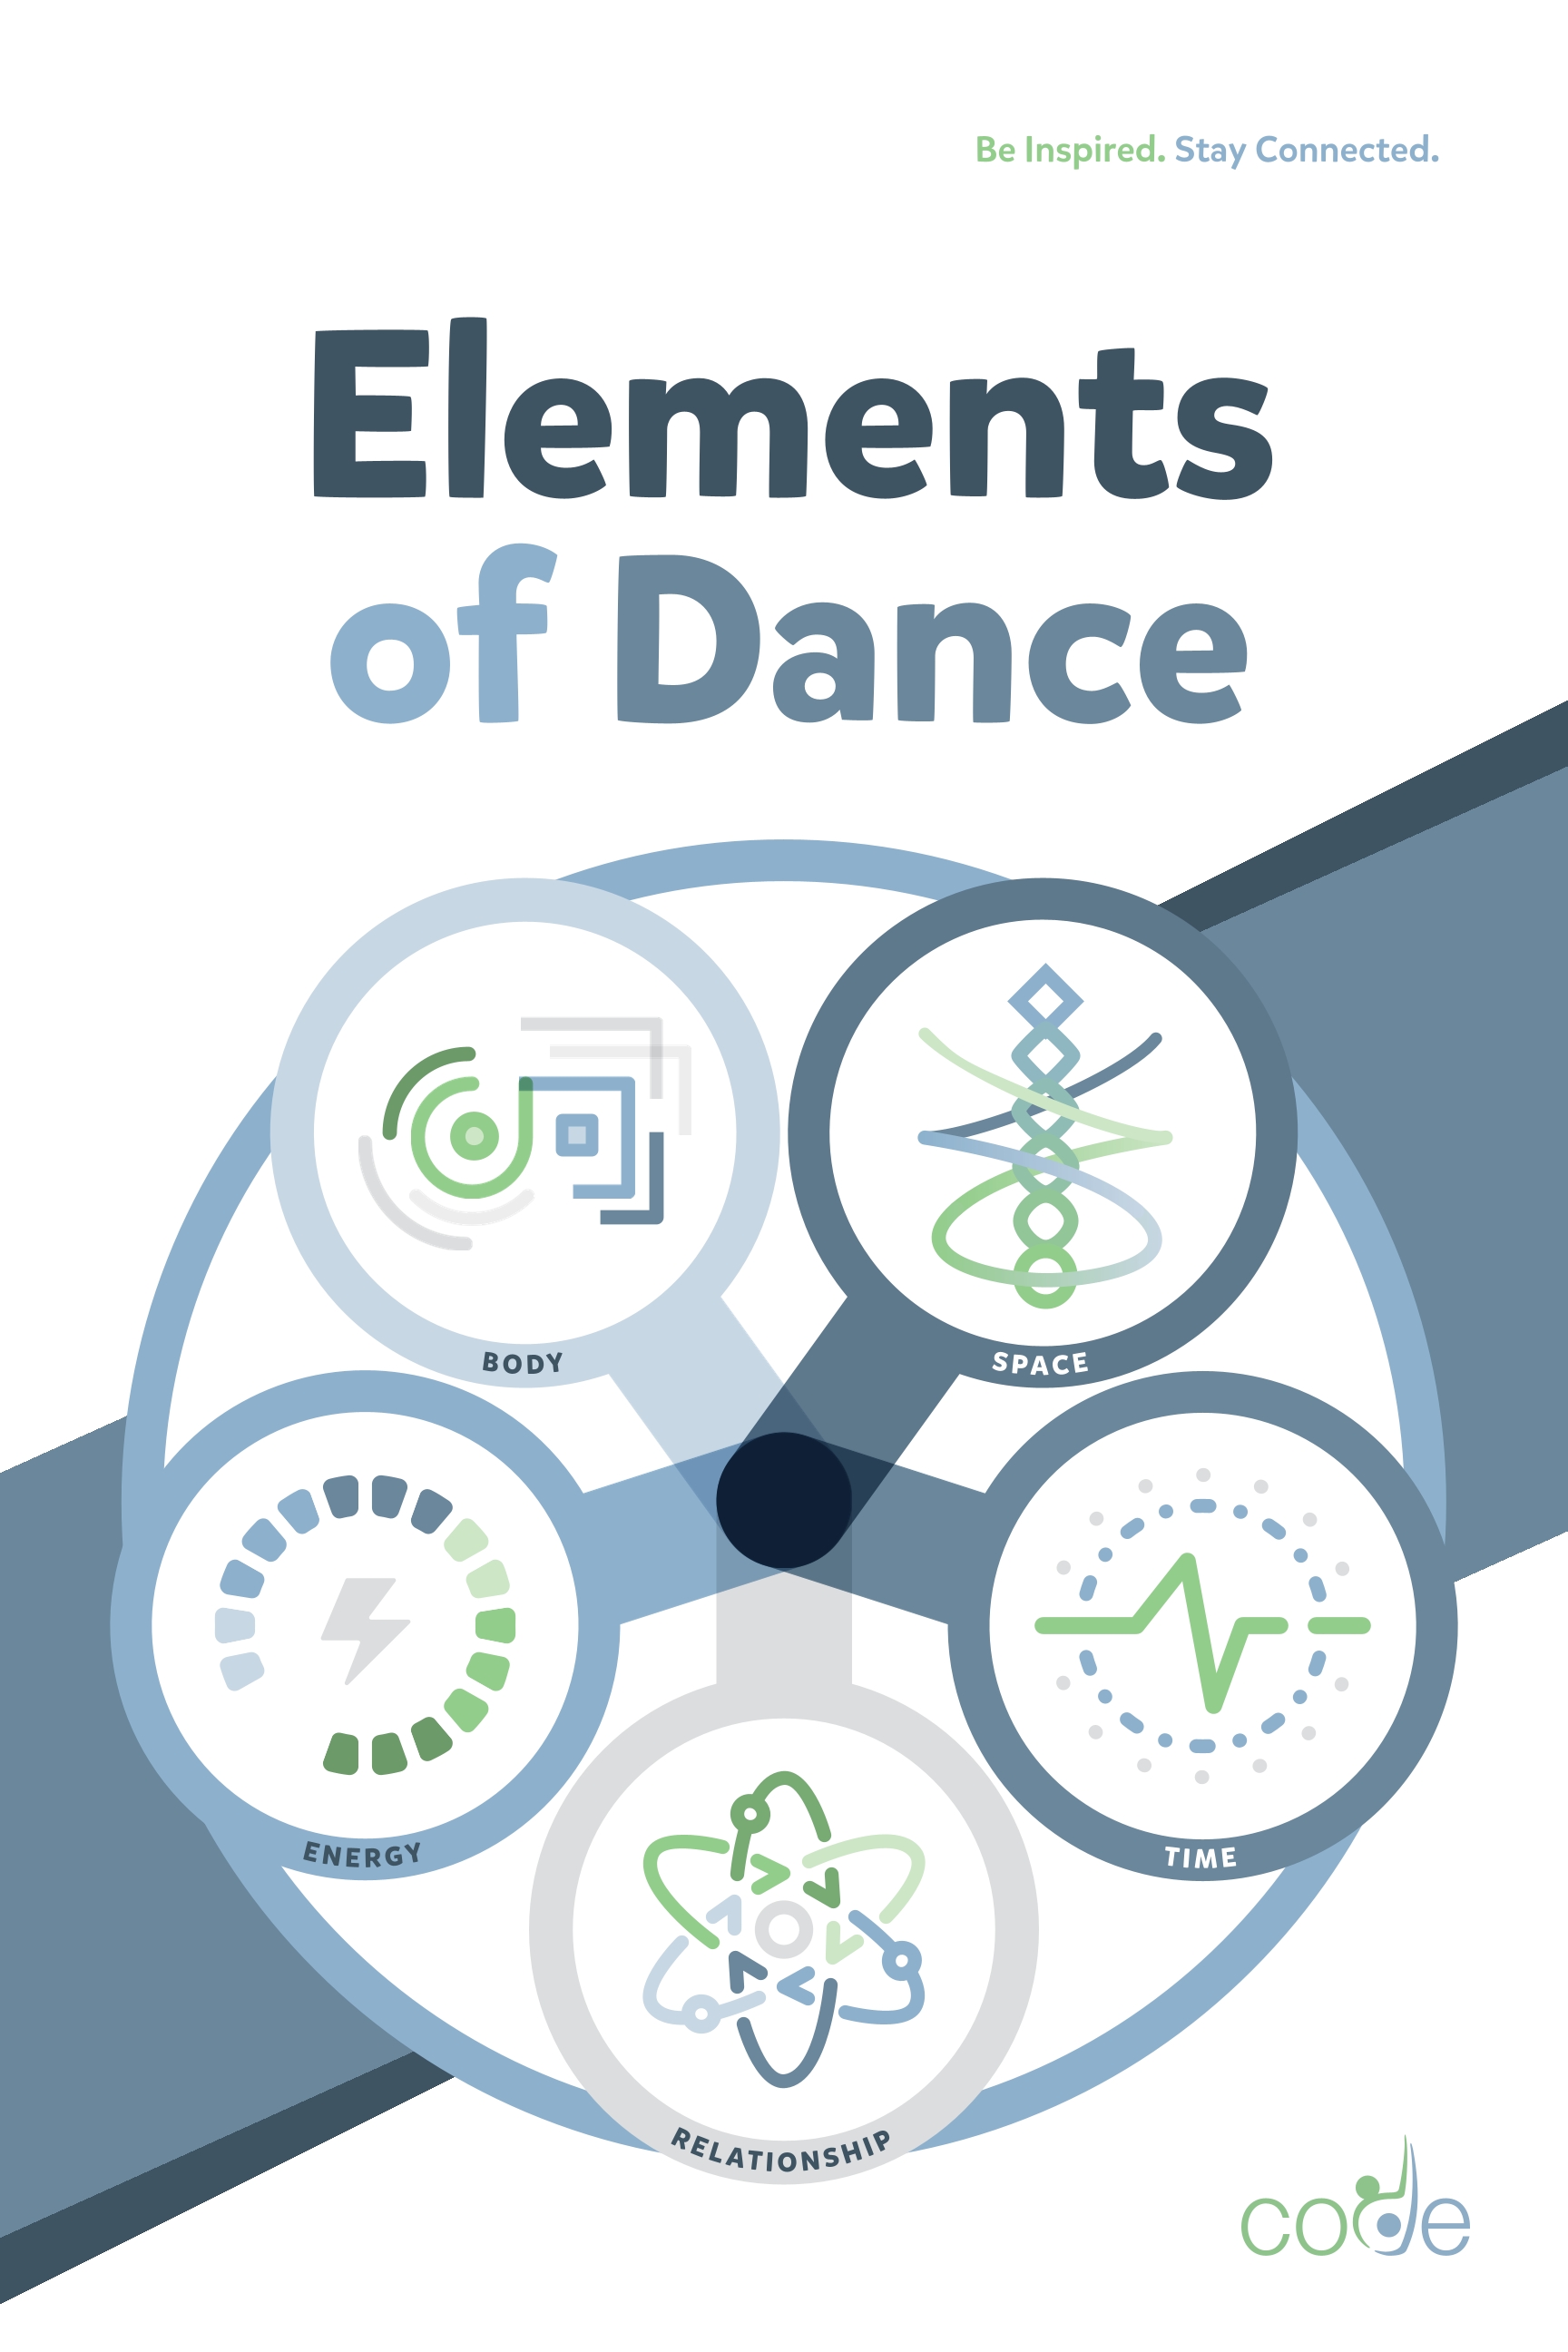 Elements of Dance Overview Poster